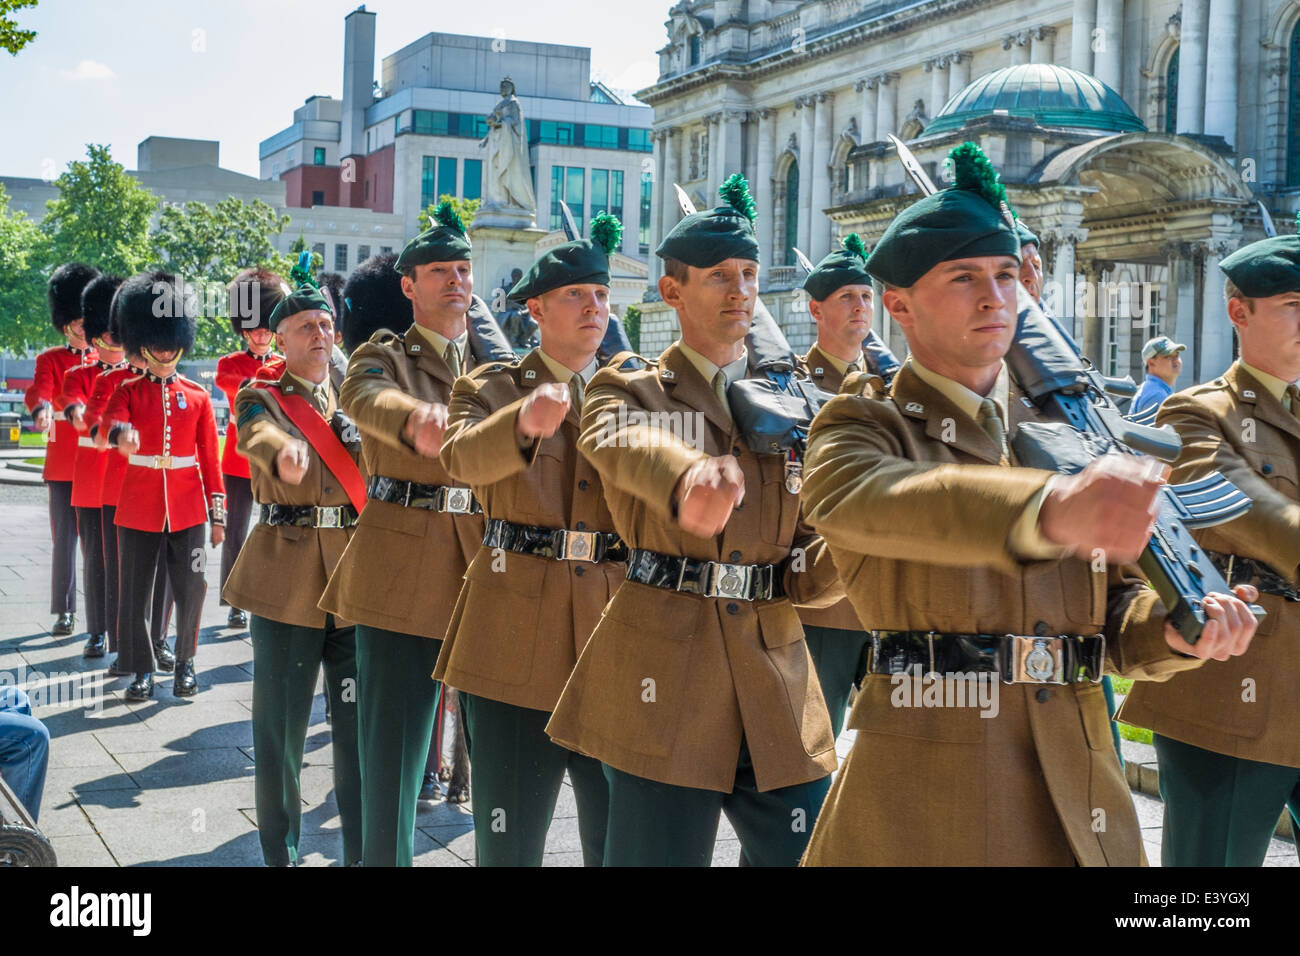 Commemorating the 98th anniversary of the Battle of the Somme at Belfast City Hall. Royal Irish Regiment on parade. Stock Photo